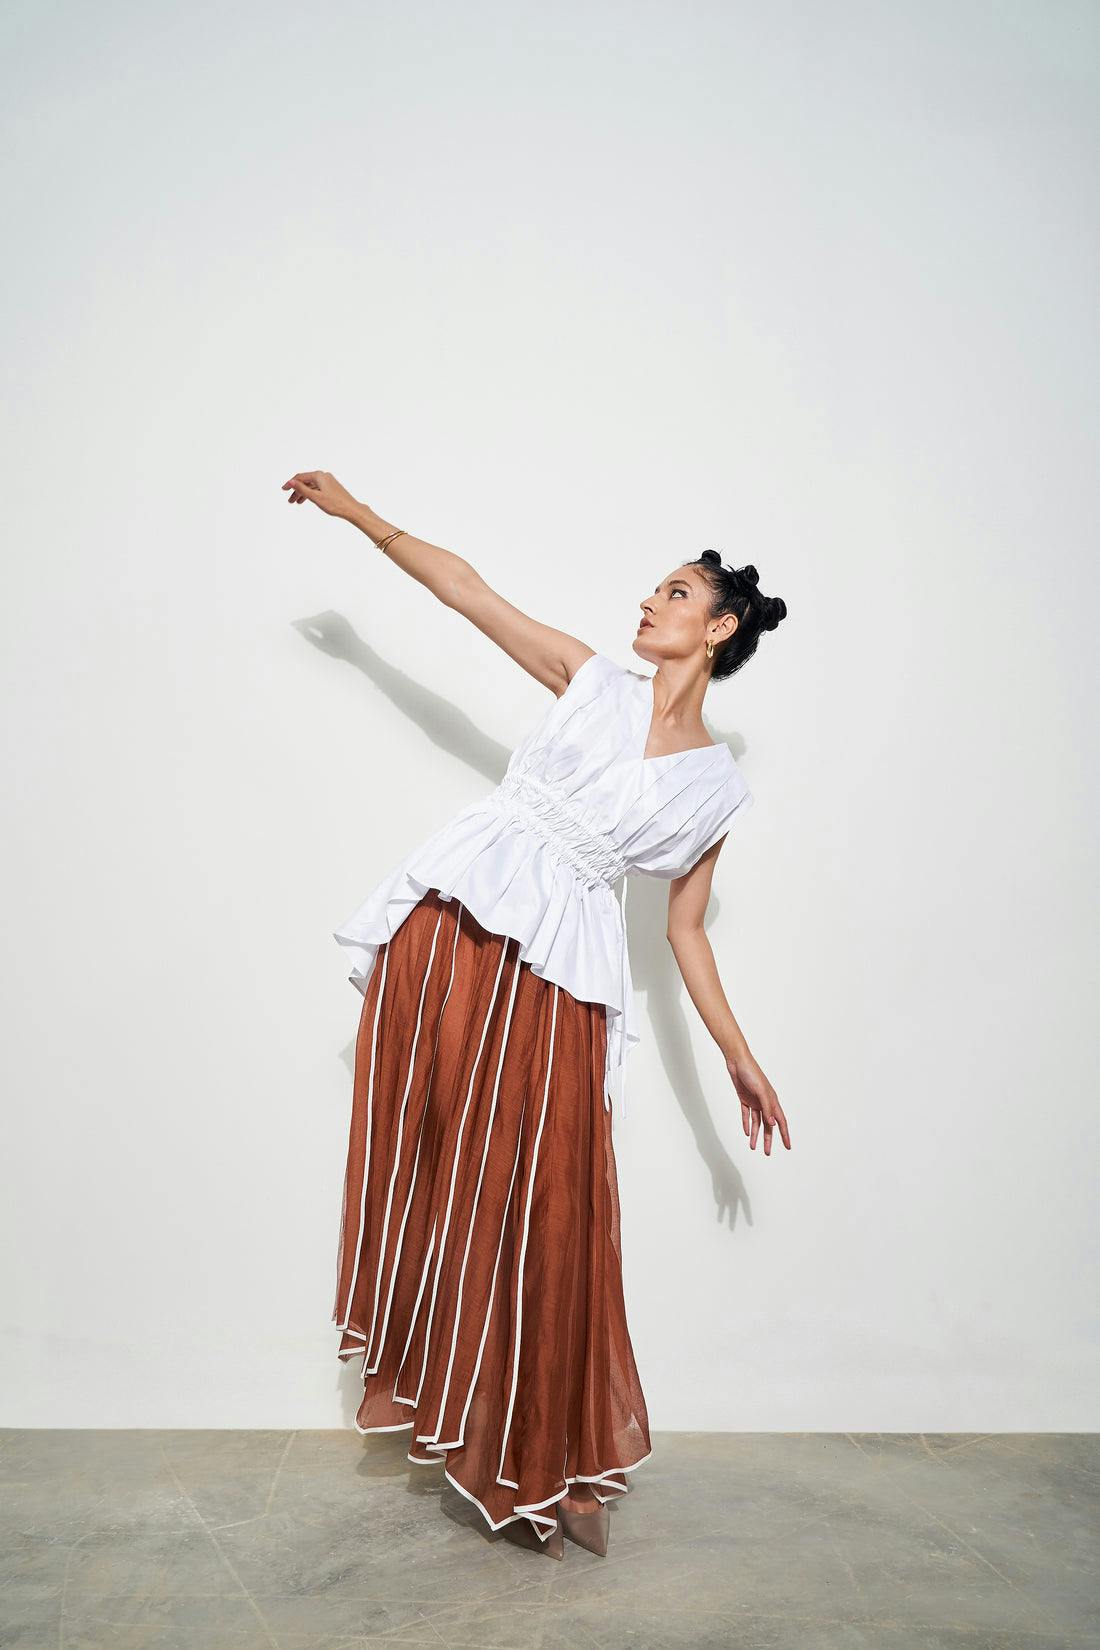 Additional image of Panelled Skirt, a product by Corpora Studio